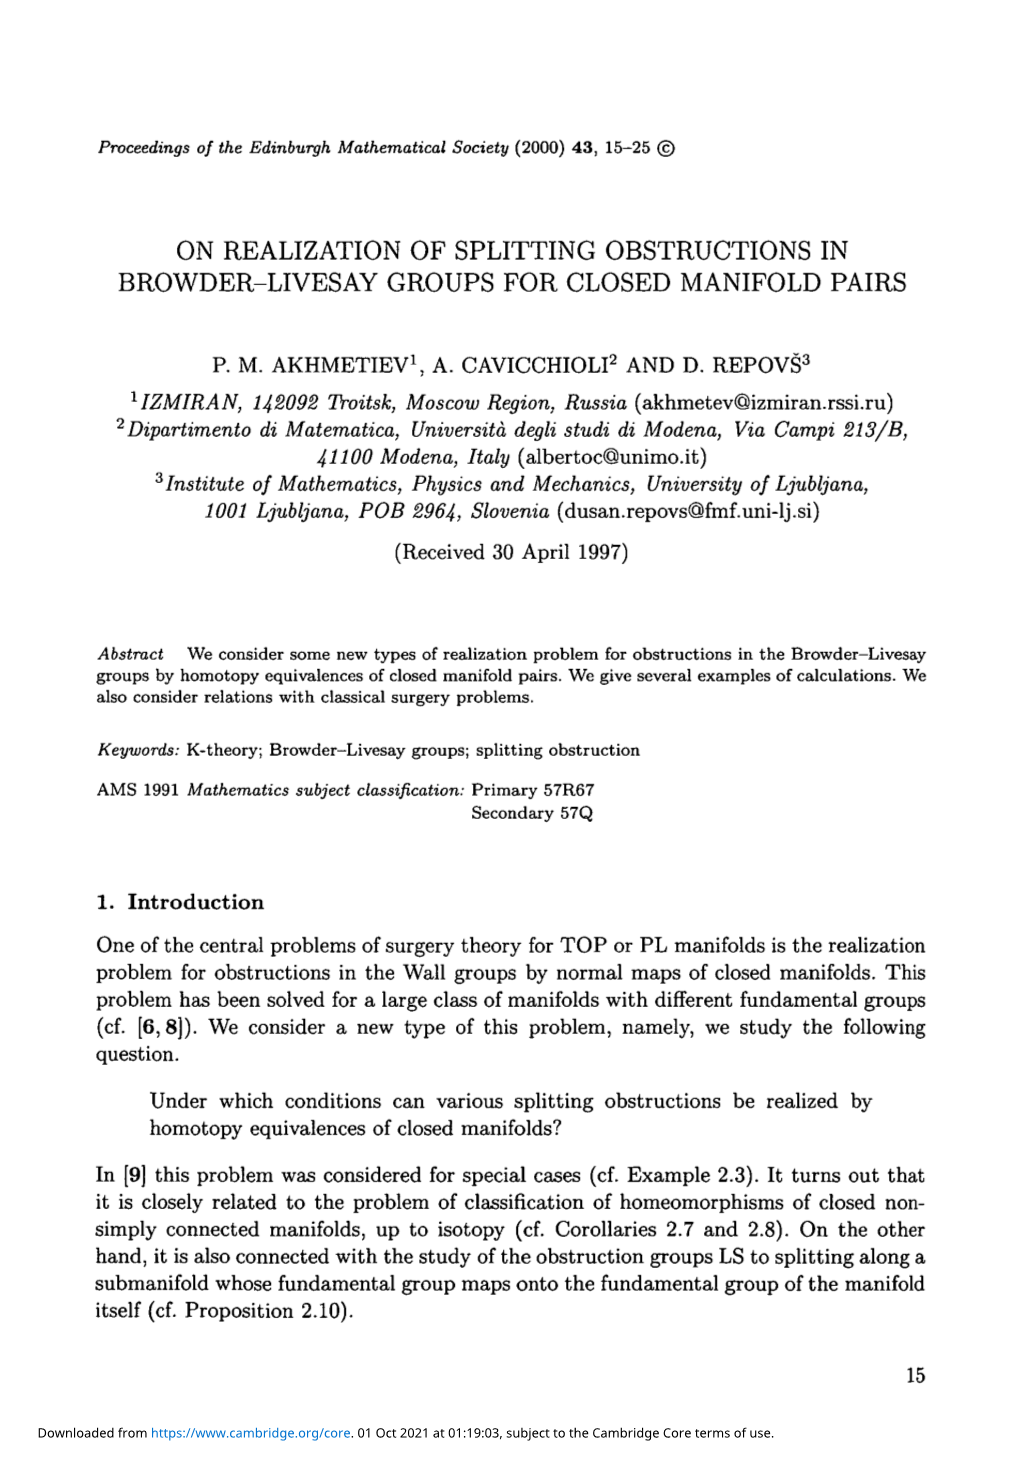 On Realization of Splitting Obstructions in Browder-Livesay Groups for Closed Manifold Pairs